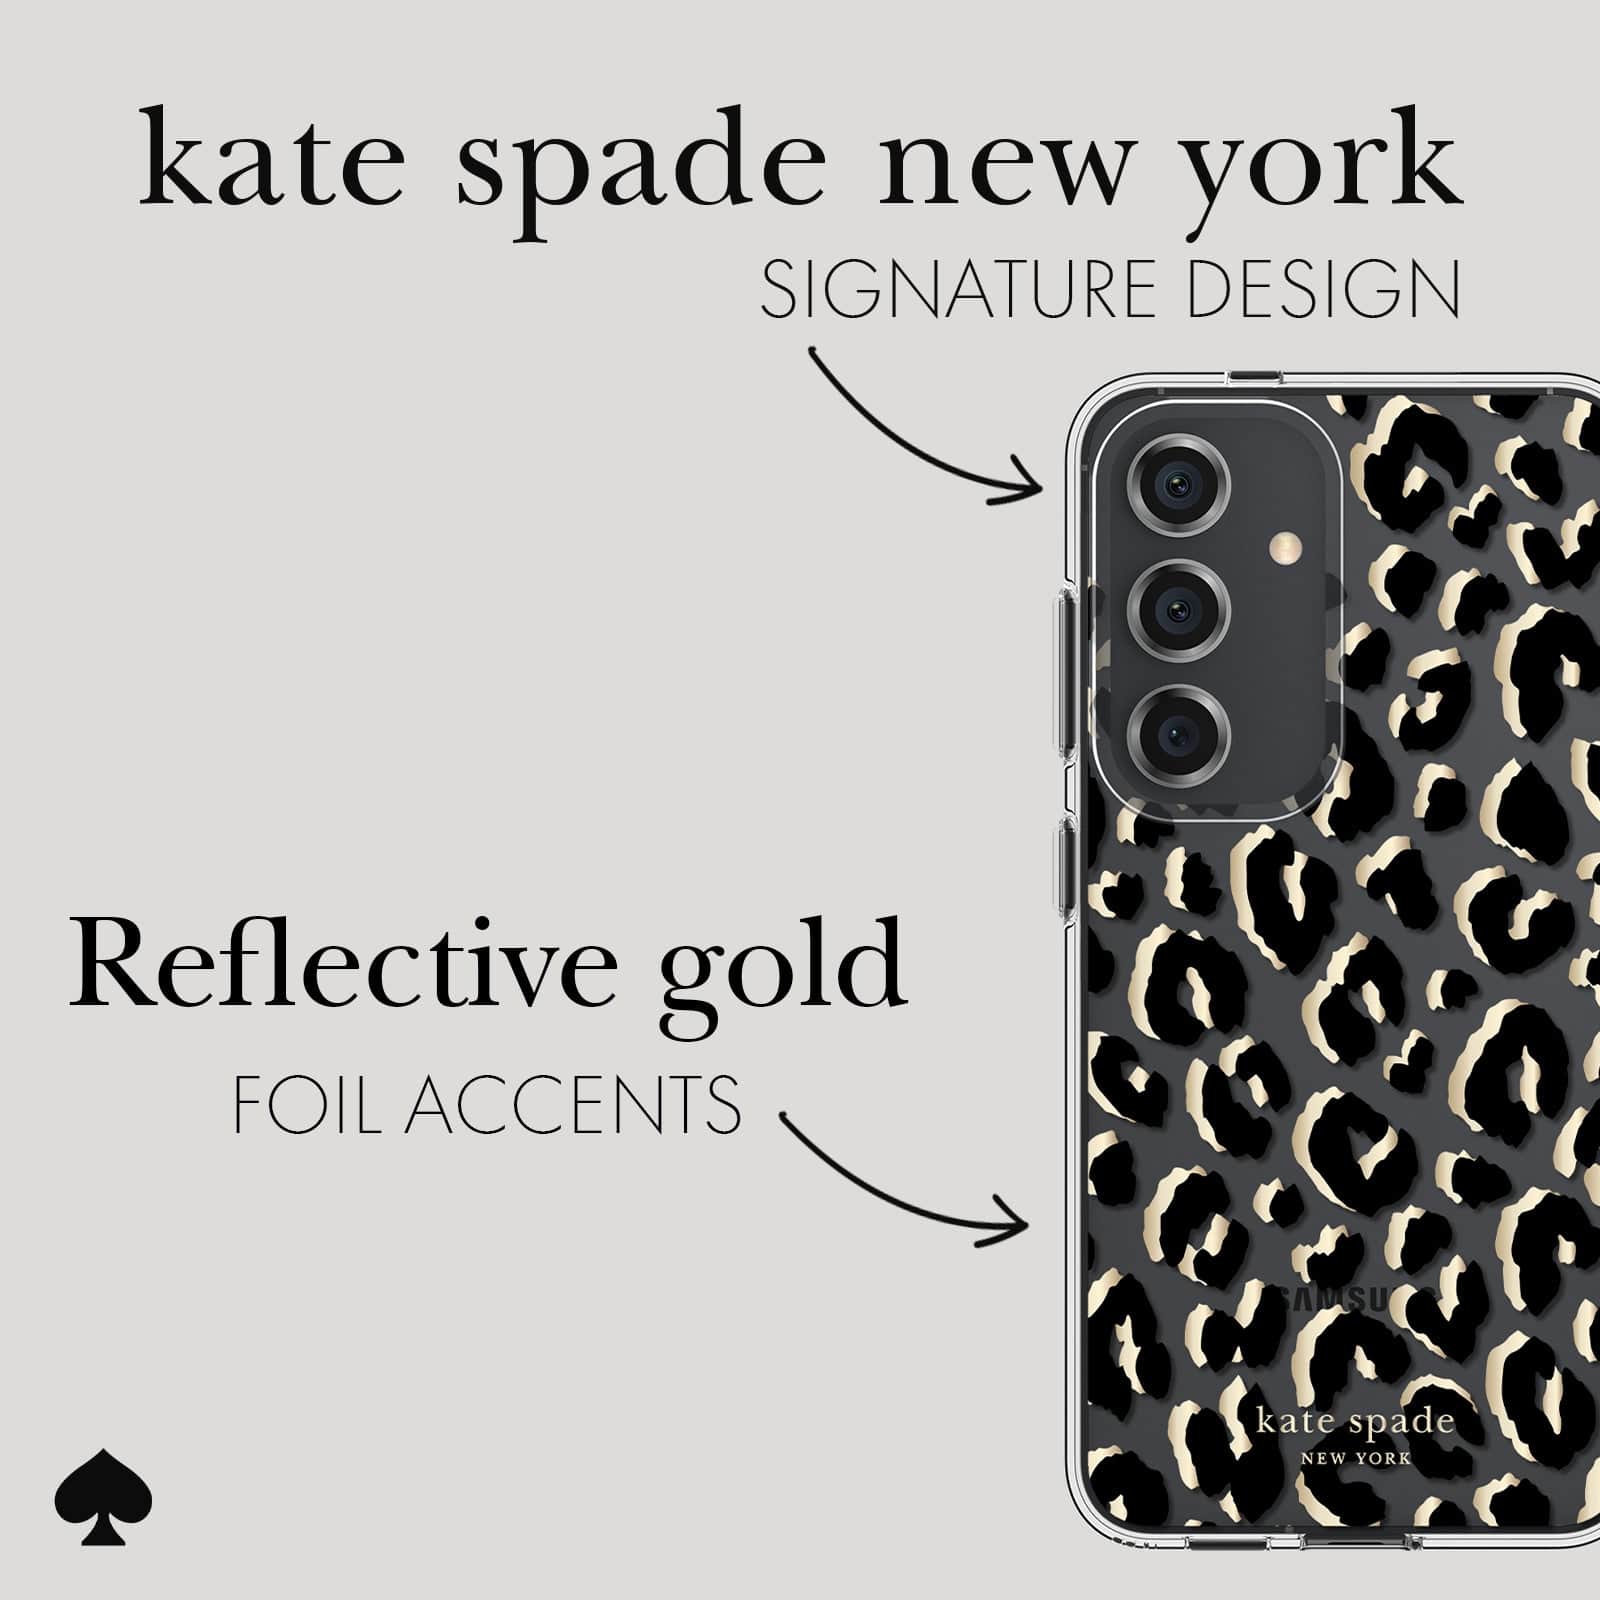 KATE SPADE NEW YORK SIGNATURE DESIGN. REFLECTIVE GOLD FOIL ACCENTS